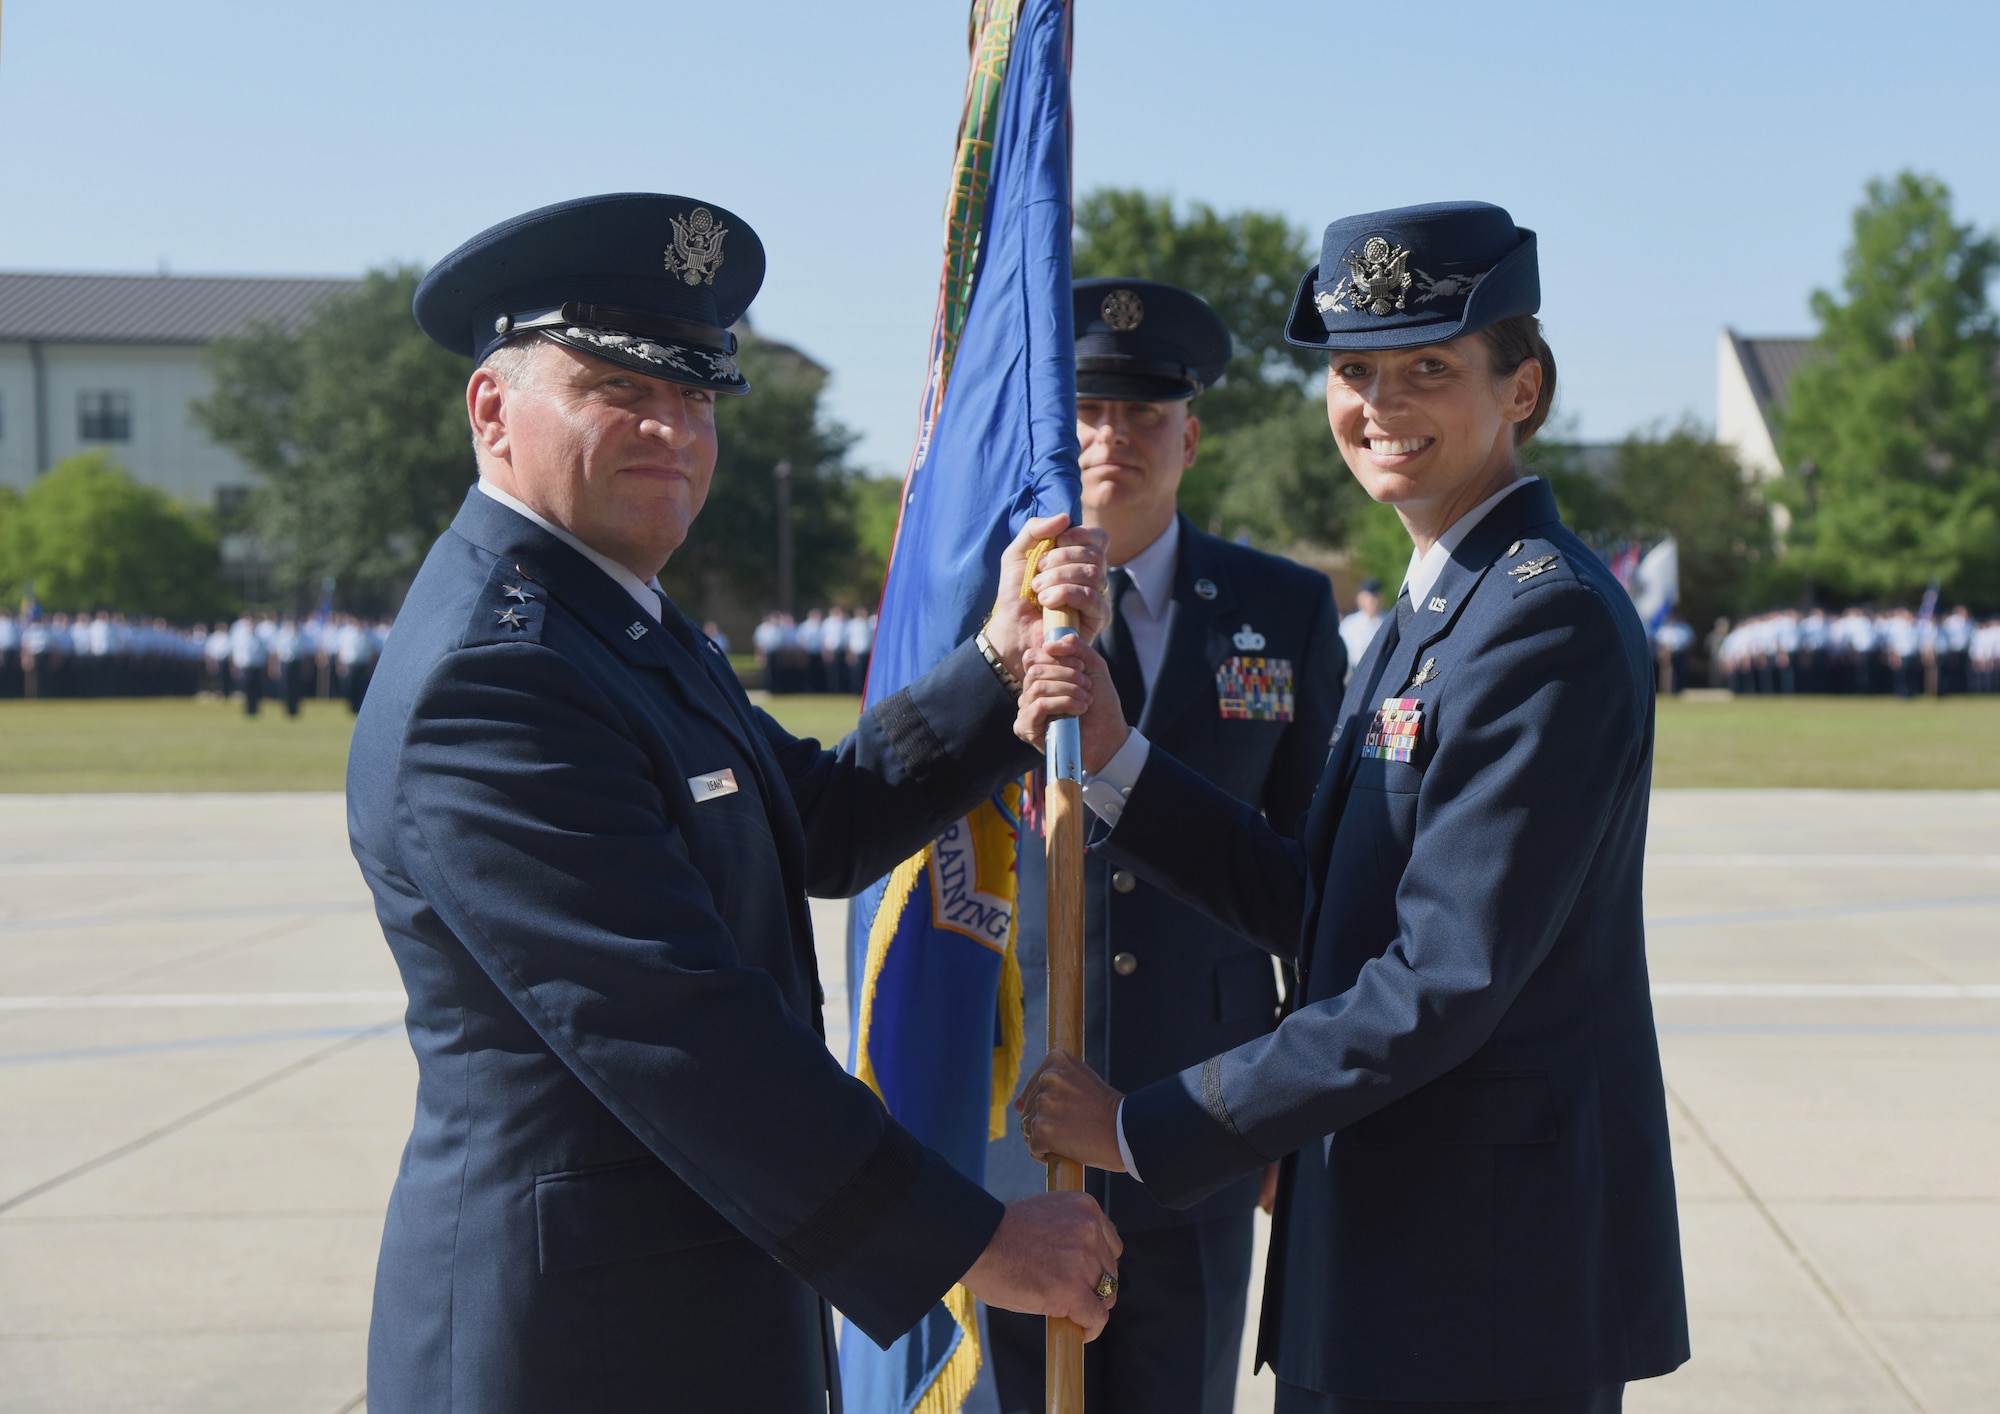 U.S. Air Force Maj. Gen. Timothy Leahy, Second Air Force commander, passes the guidon to Col. Heather Blackwell, 81st Training Wing commander, during a change of command ceremony at the Levitow Training Support Facility drill pad at Keesler Air Force Base, Mississippi, May 16, 2019. The ceremony is a symbol of command being exchanged from one commander to the next. Blackwell assumed command of the 81st TRW from Col. Debra Lovette. (U.S. Air Force photo by Kemberly Groue)